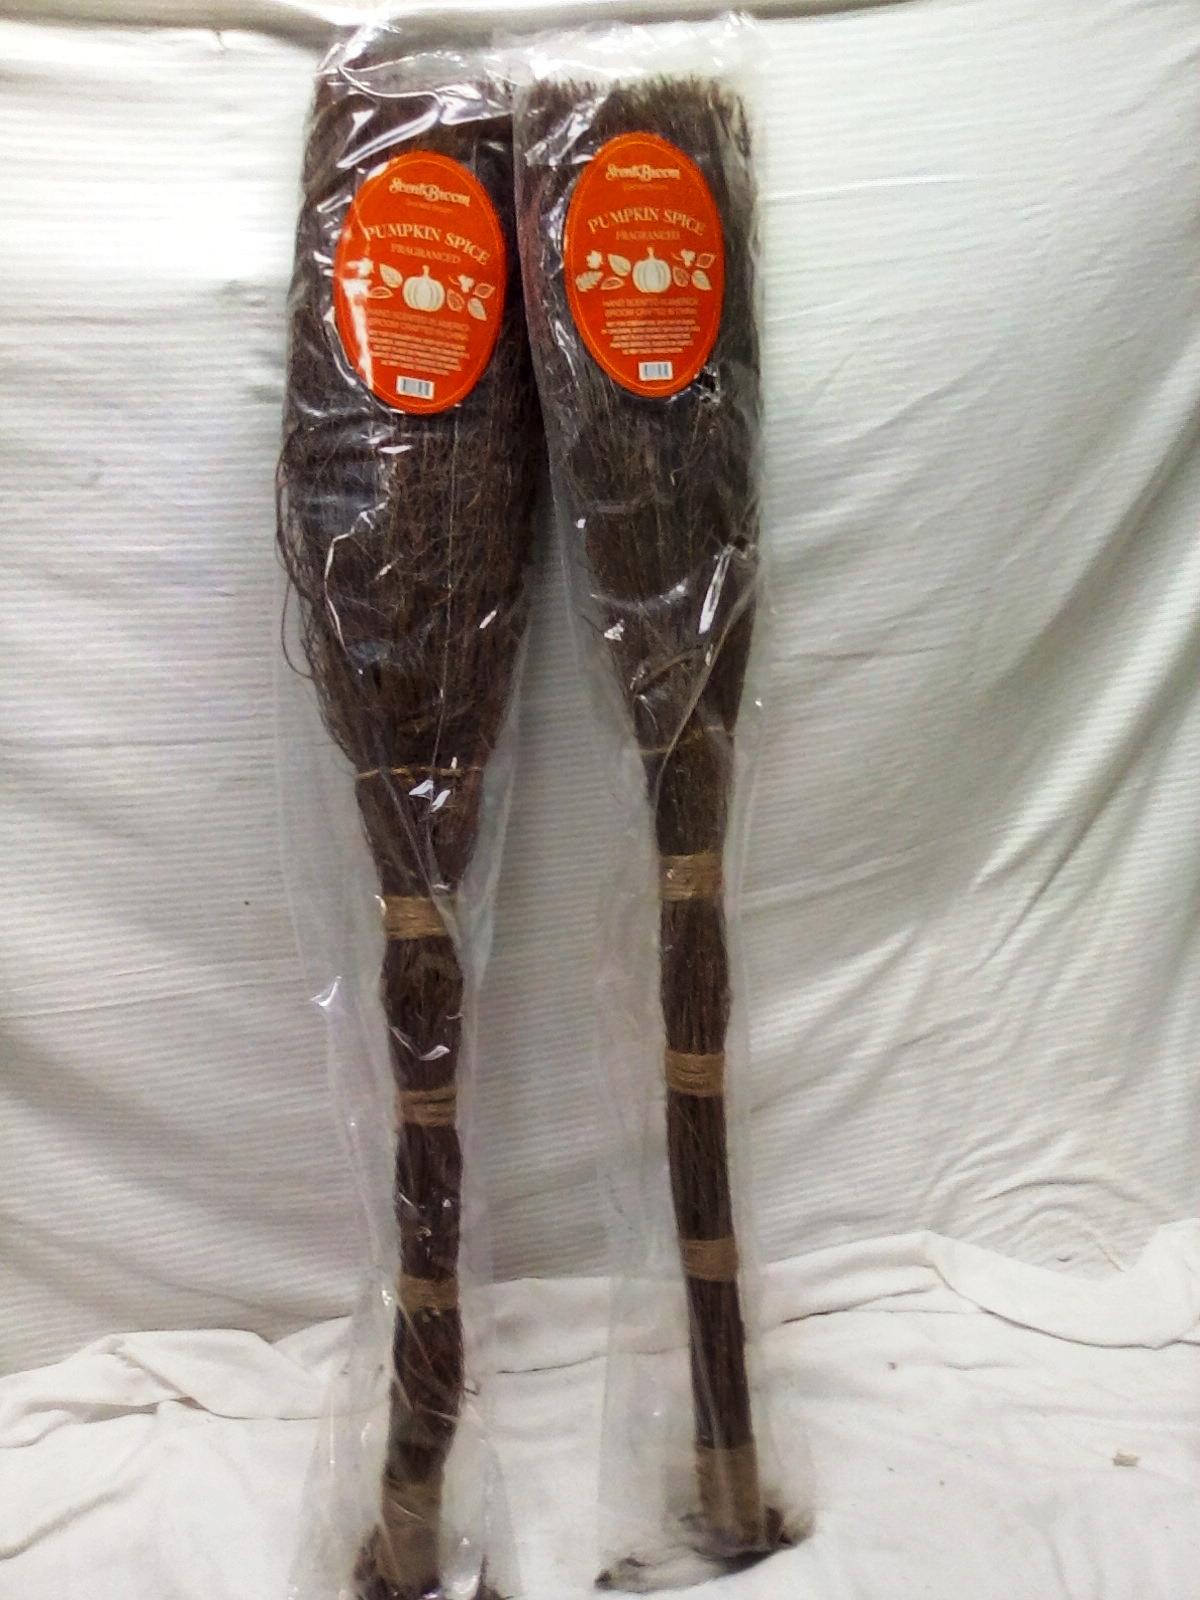 Pair of 36" Scent Brooms with Pumpkin Spice Fragrance